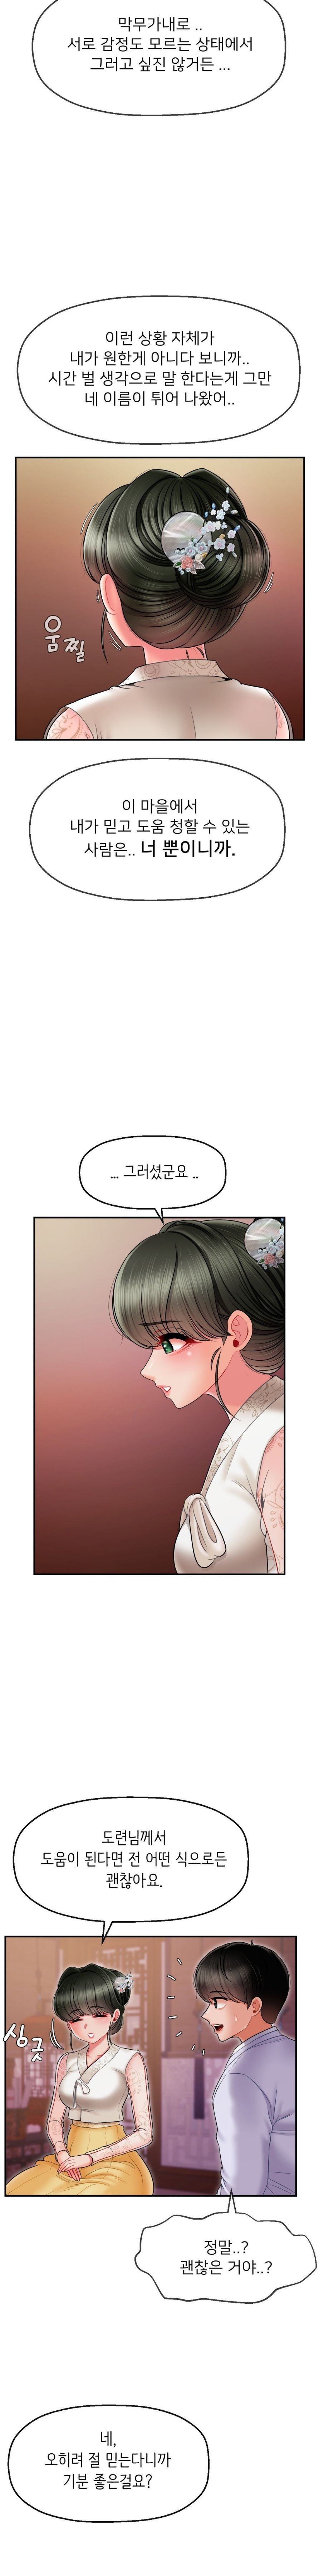 seventeenth-only-son-raw-chap-3-17